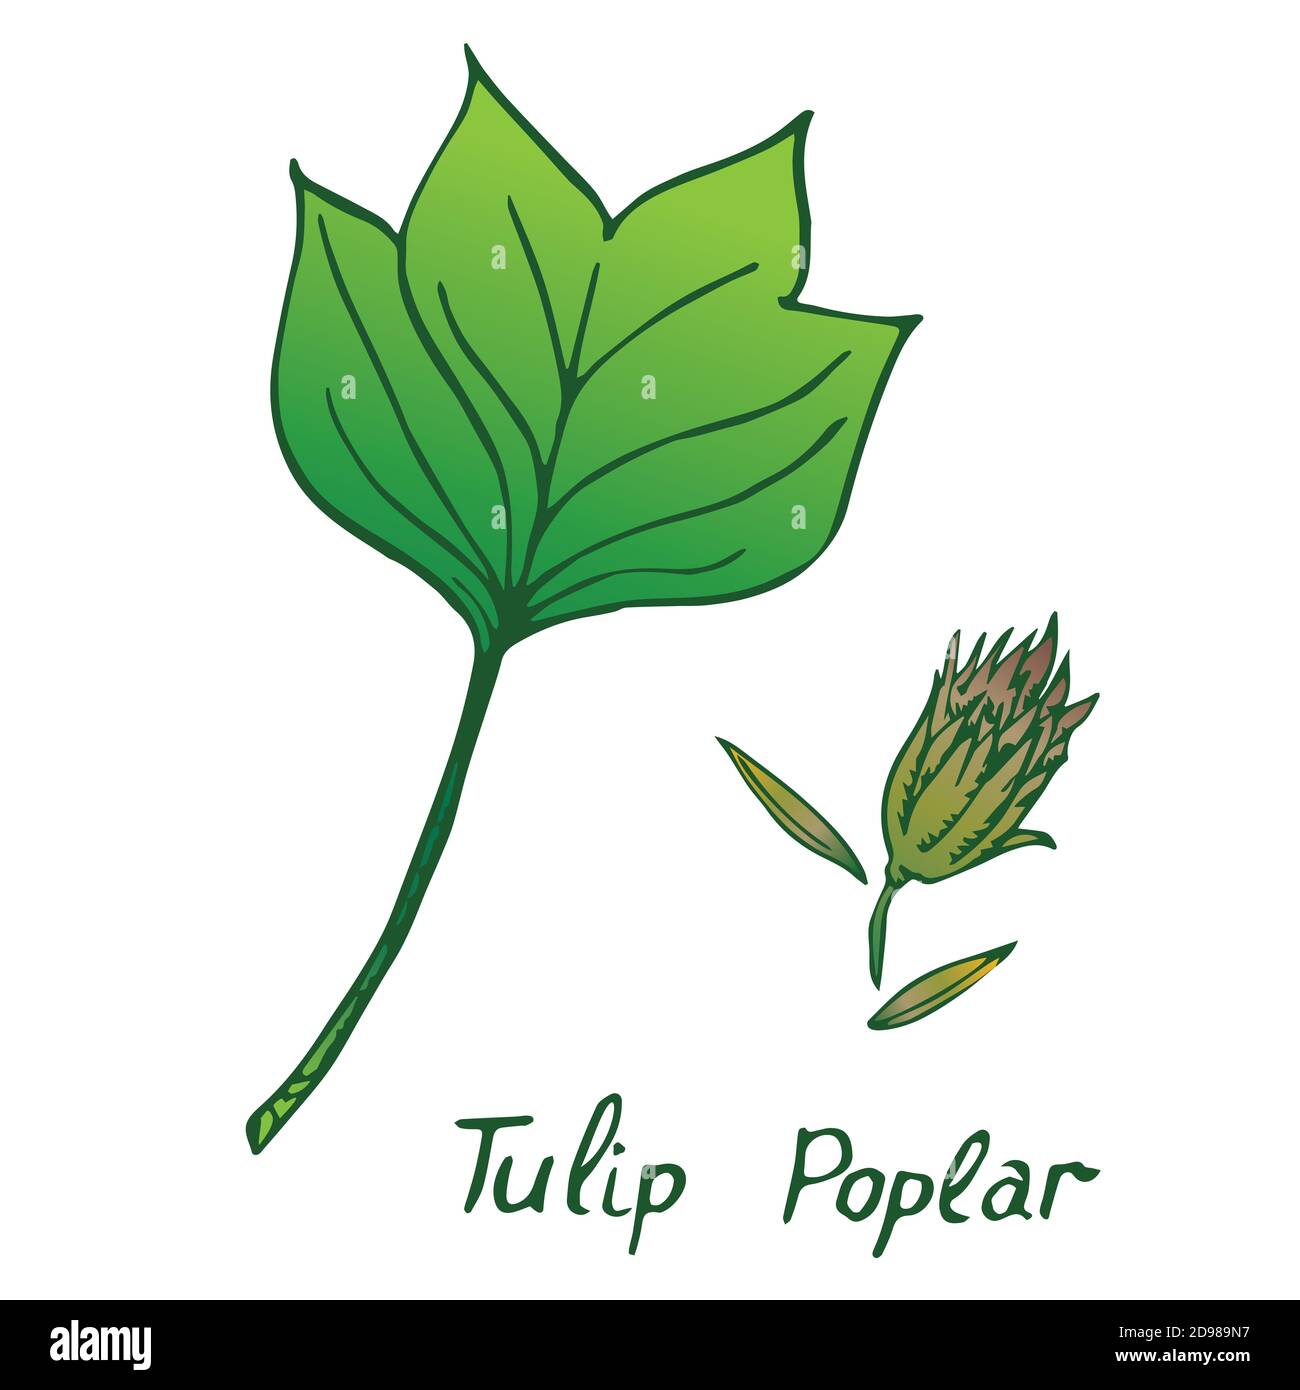 Tulip poplar (Liriodendron tulipifera or American tulip tree) leaf and seed, hand drawn doodle, color sketch illustration Stock Photo